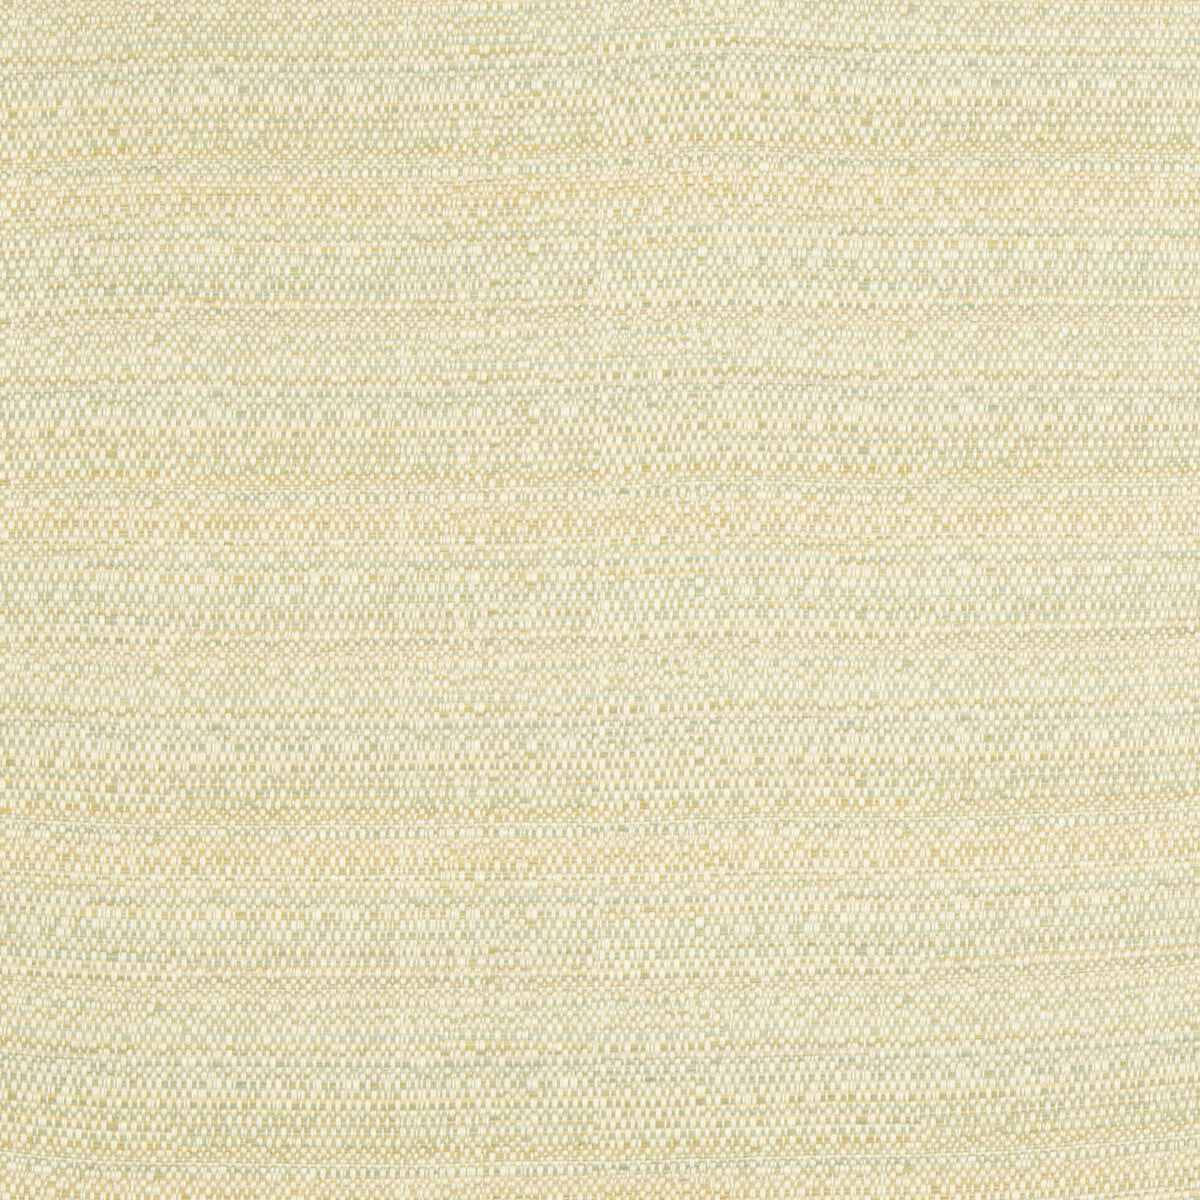 Melanger fabric in vapor color - pattern 31695.1615.0 - by Kravet Couture in the Echo Indoor Outdoor Ibiza collection